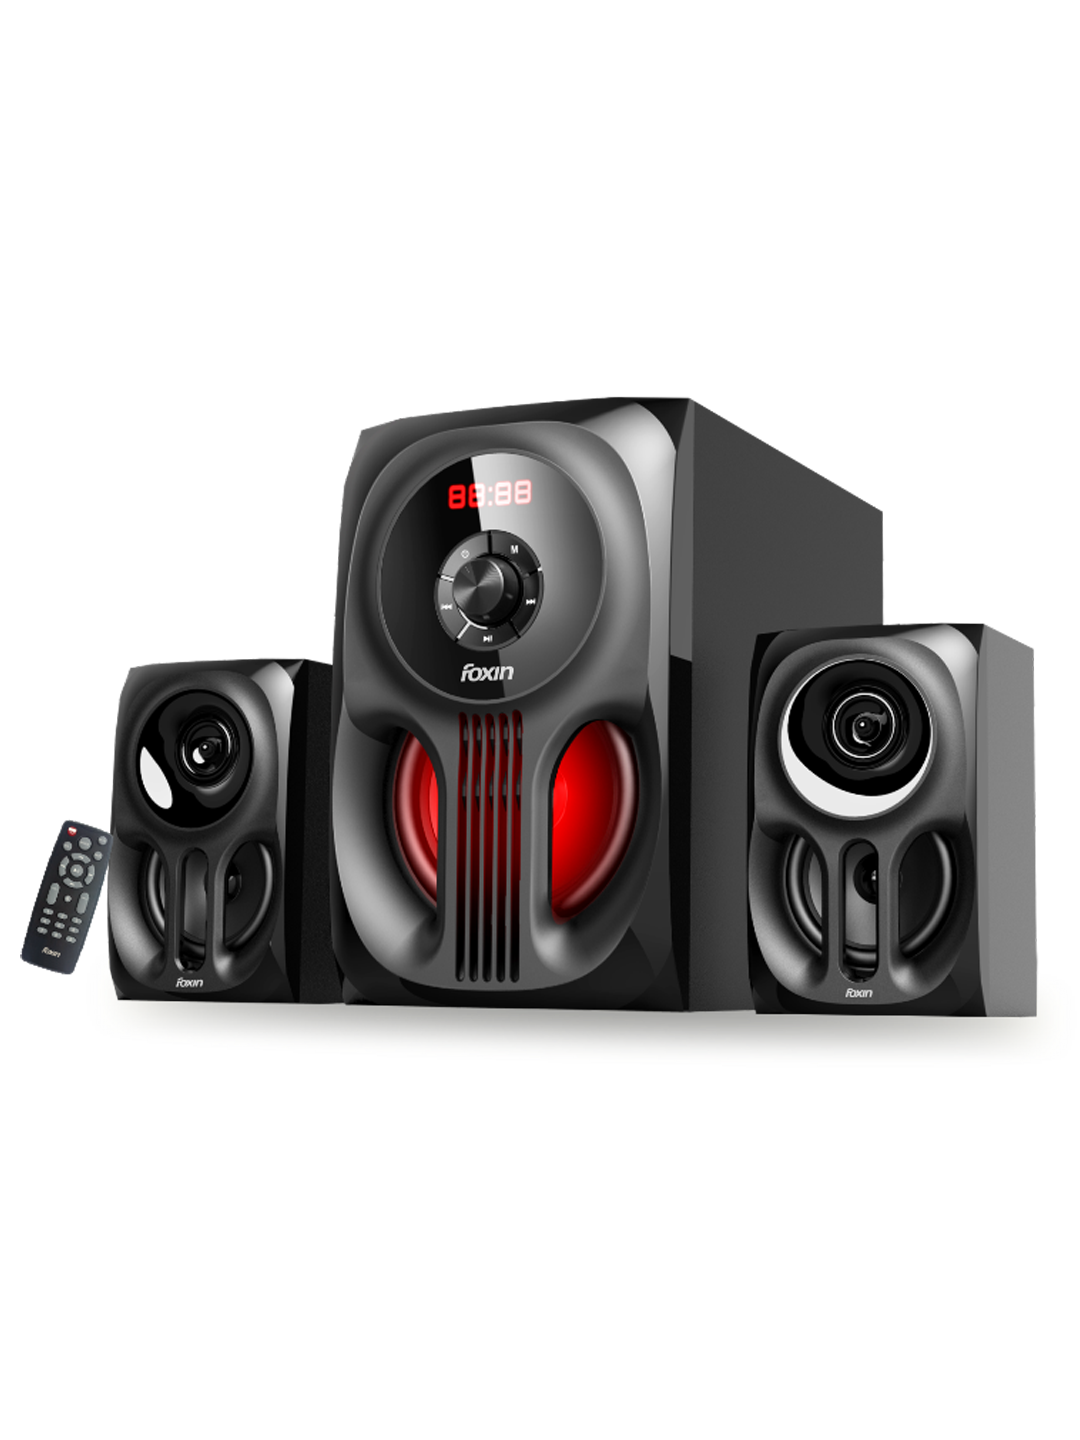 Foxin FMS 4200 2.1 Channel Multimedia Speaker 60 Watt /Foxin home theater/ music system for home/party speakers